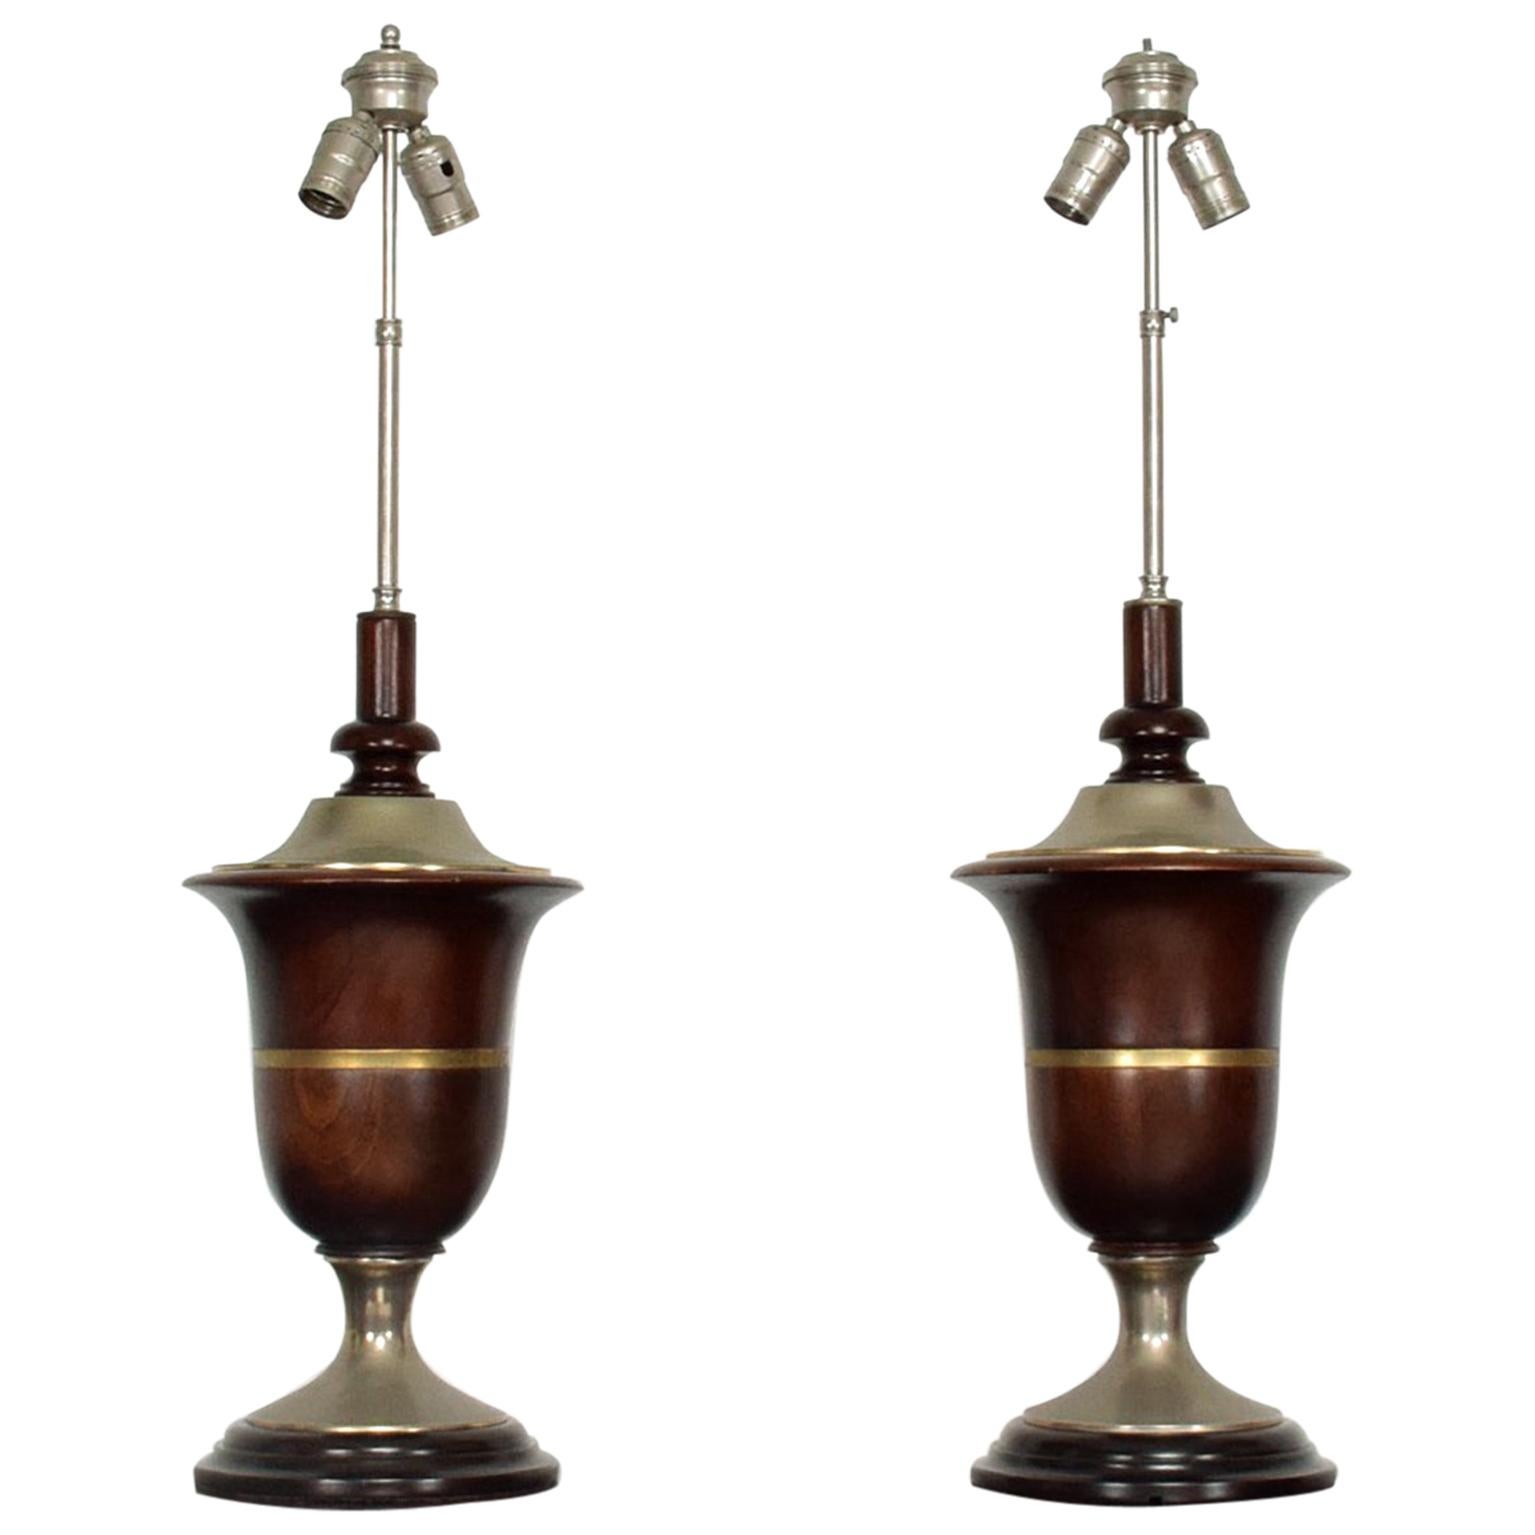  Neoclassical Mahogany Adjustable Table Lamps Mexican Modern Luis Barragan 1940s